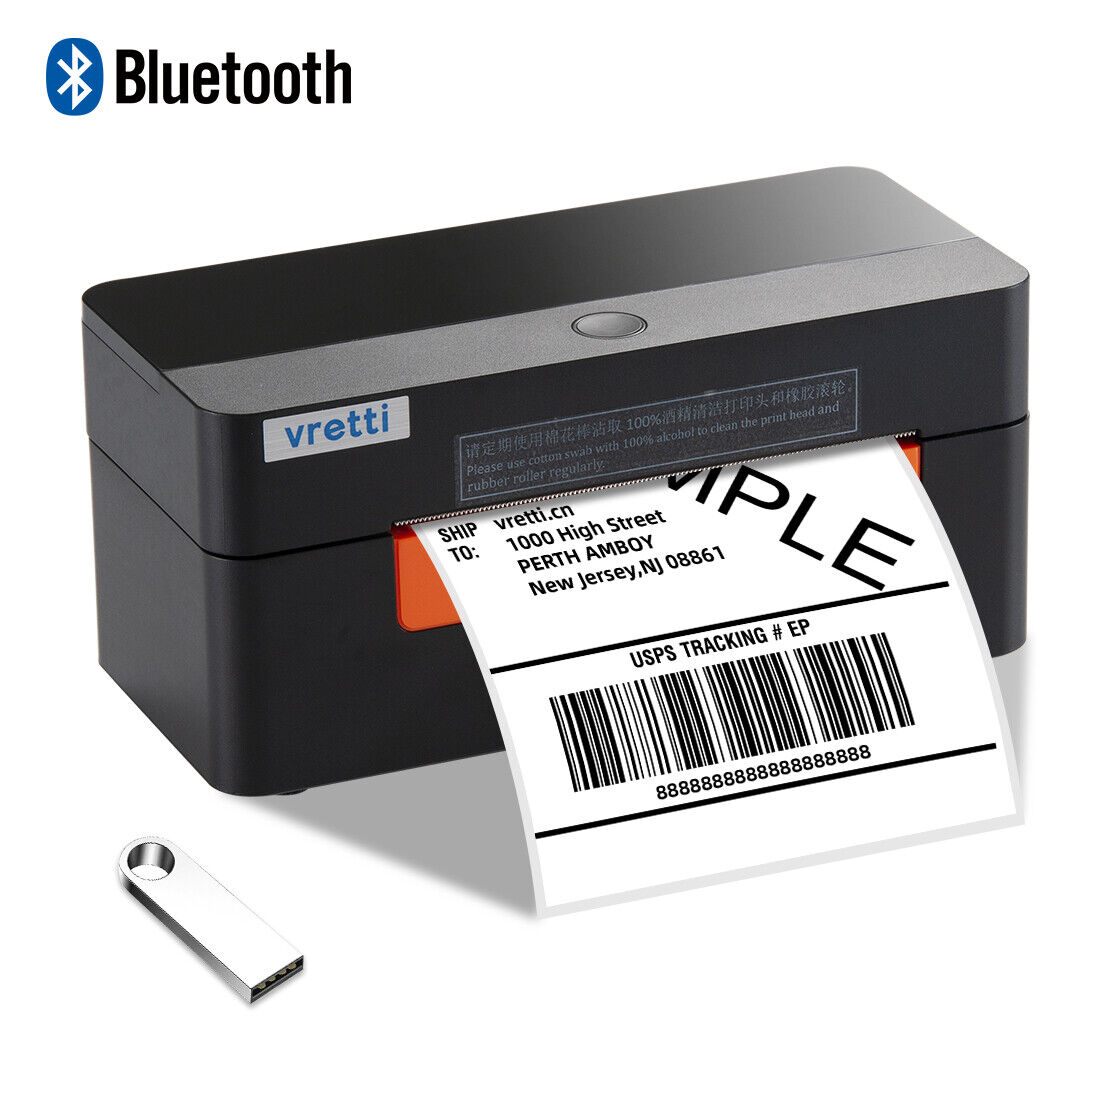 VRETTI Wireless Bluetooth Thermal Shipping Label Printer 4x6 For Small Business